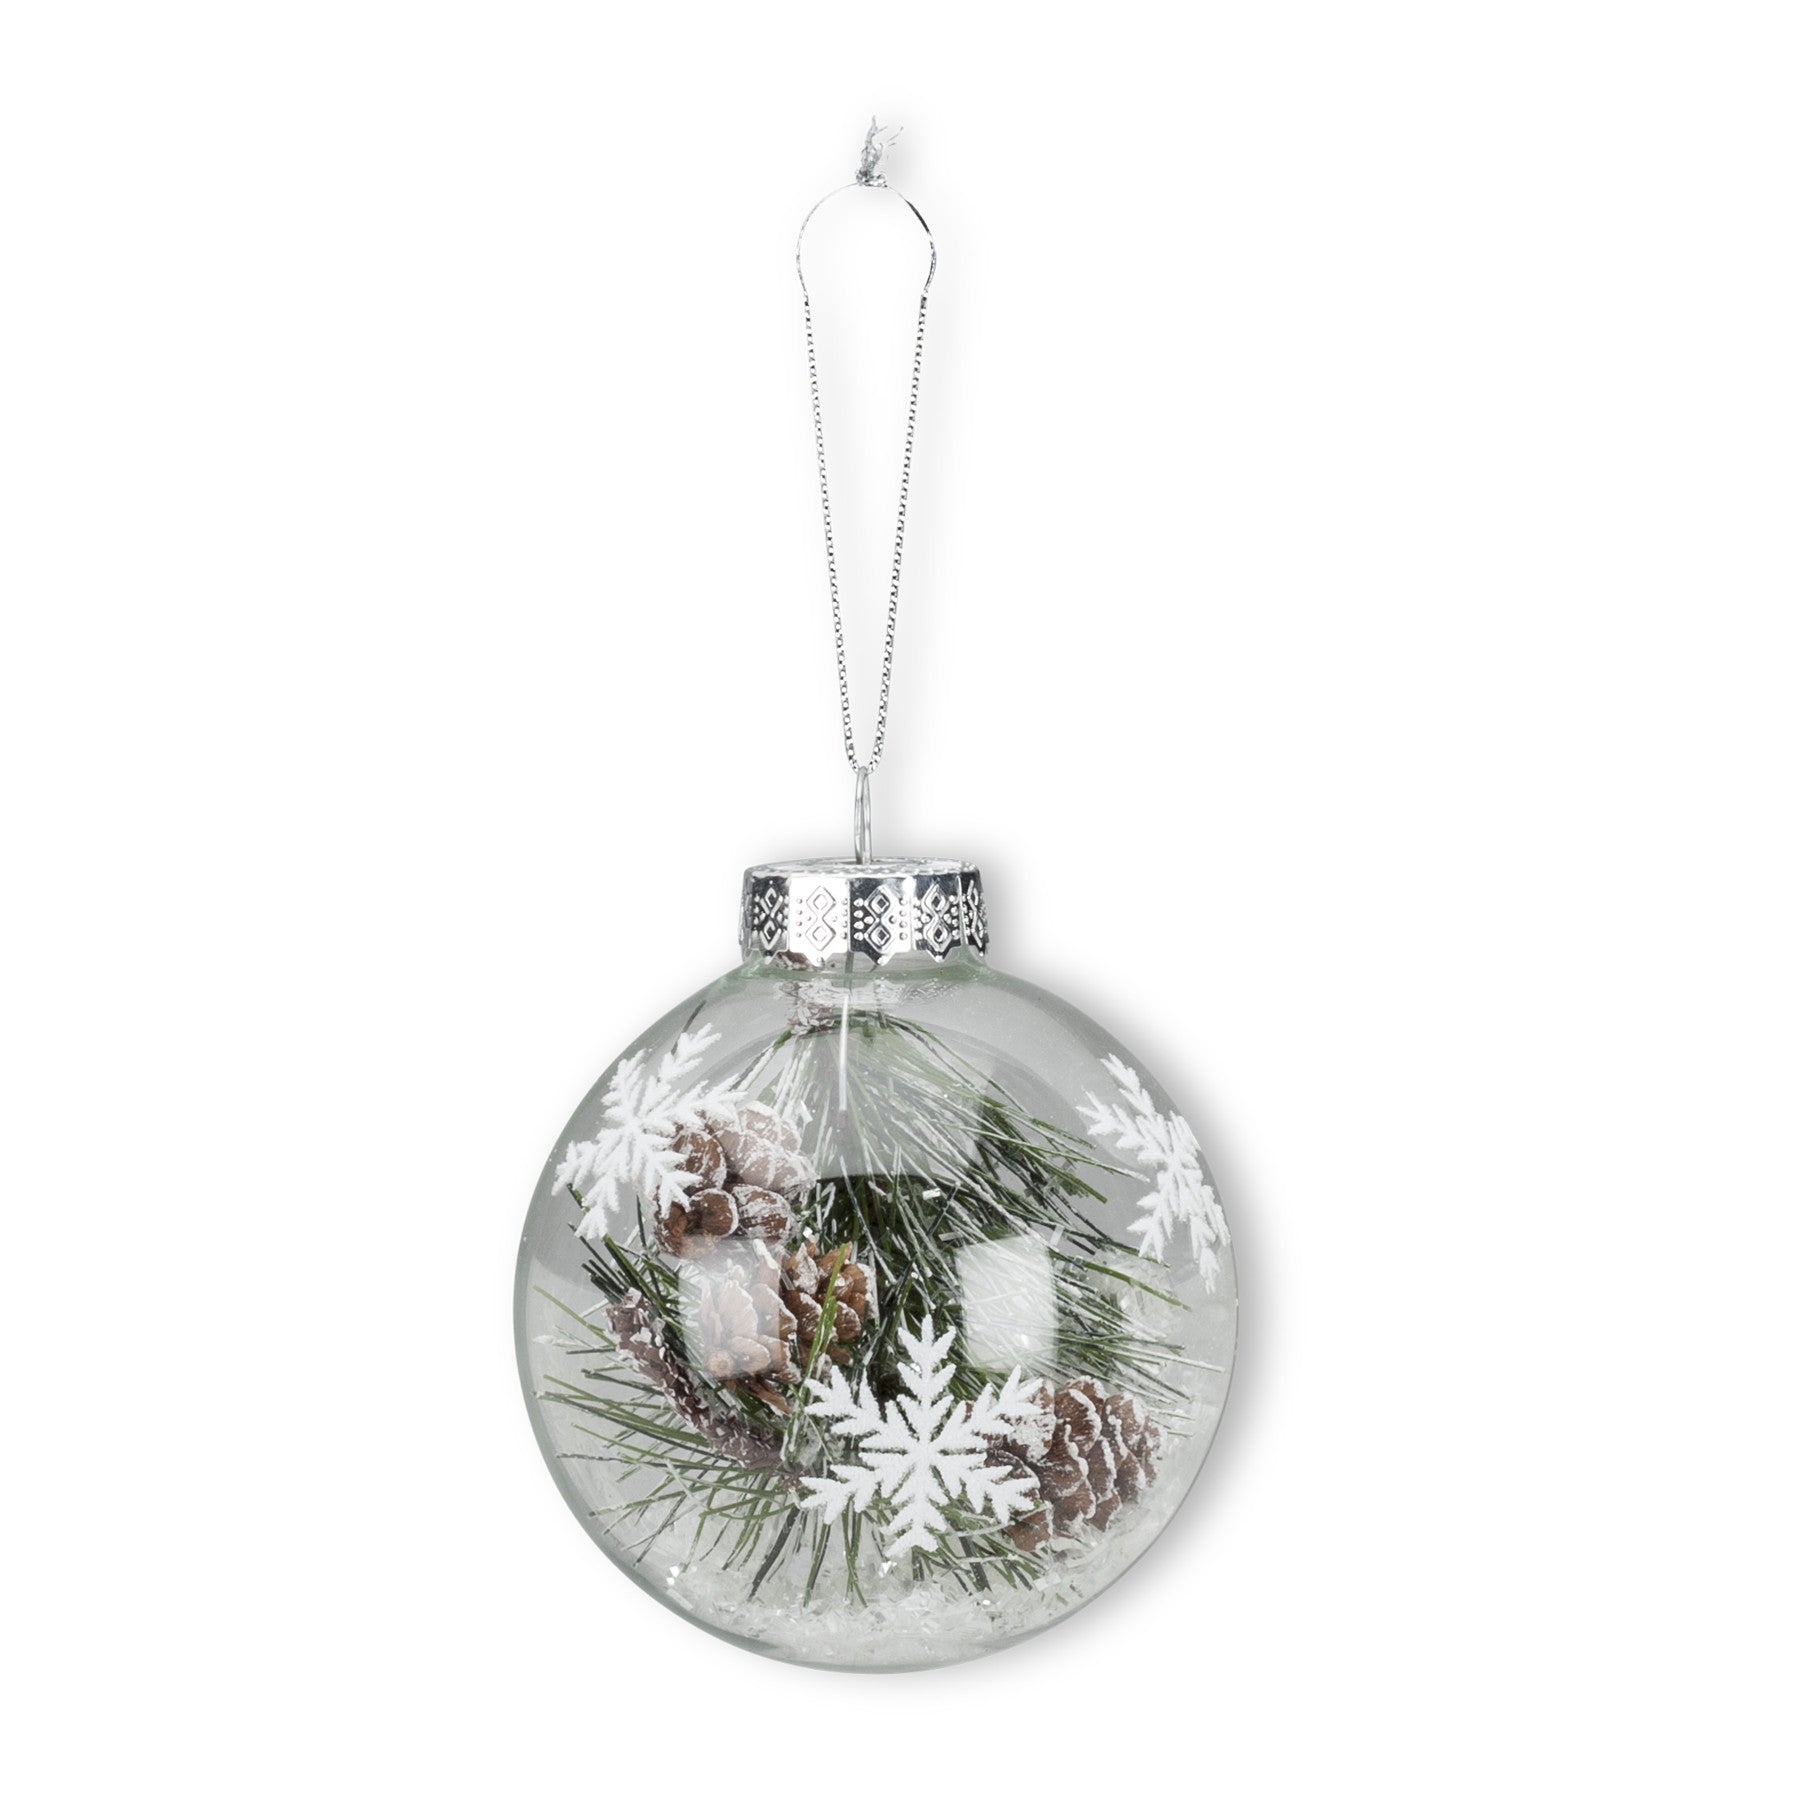 Pine and Bough Snow Ornament -  Christmas - AC-Abbott Collection - Putti Fine Furnishings Toronto Canada